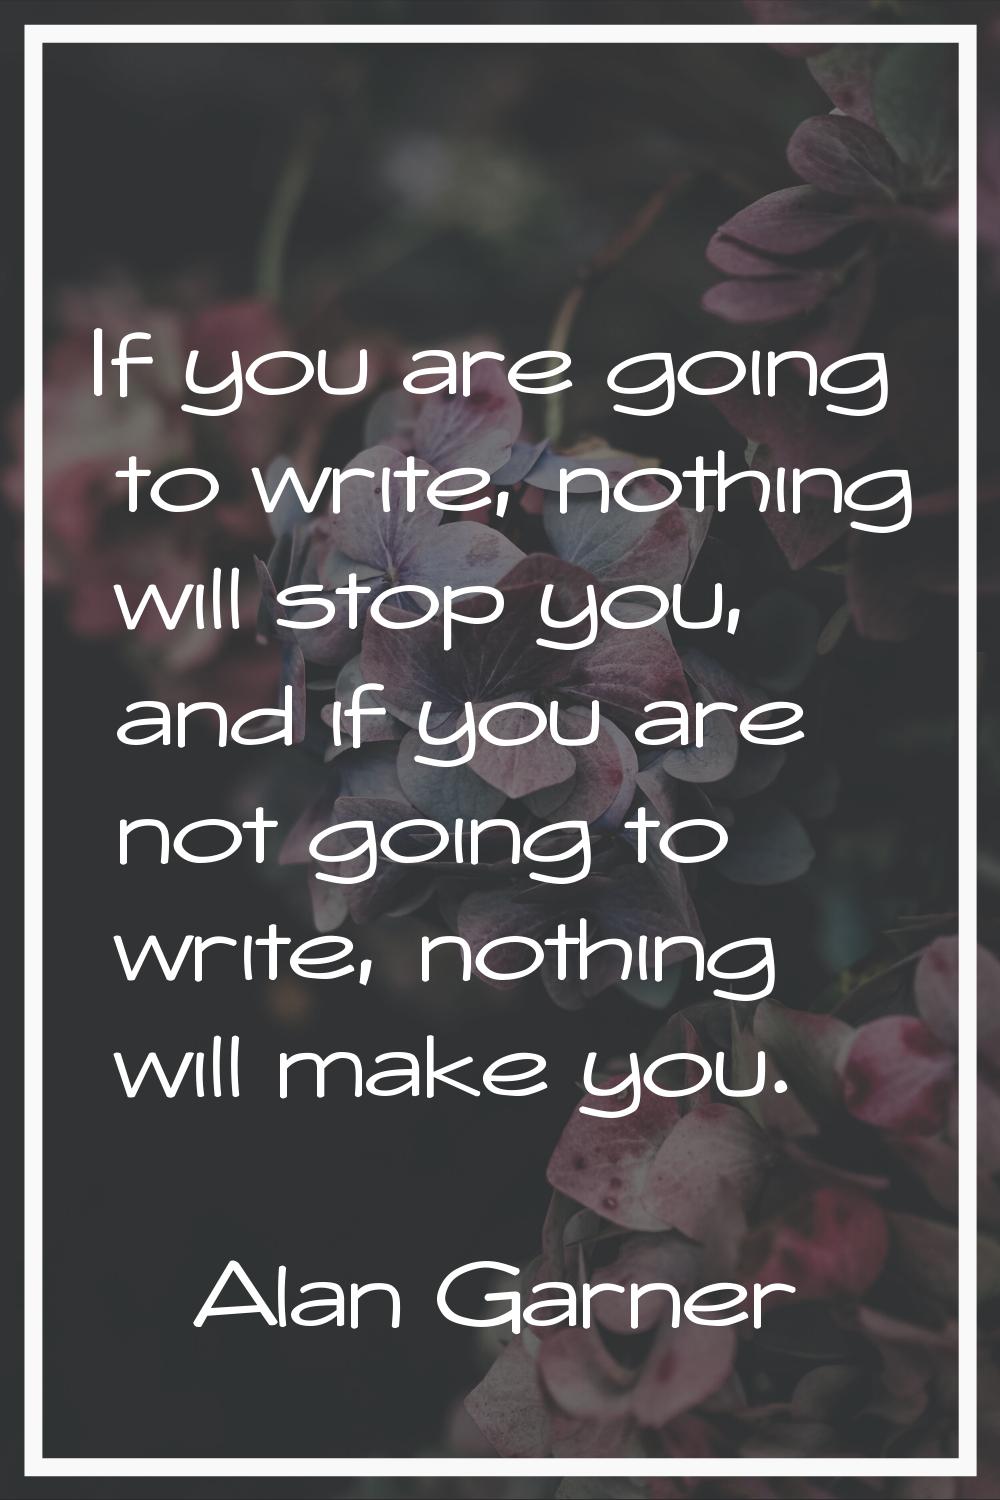 If you are going to write, nothing will stop you, and if you are not going to write, nothing will m